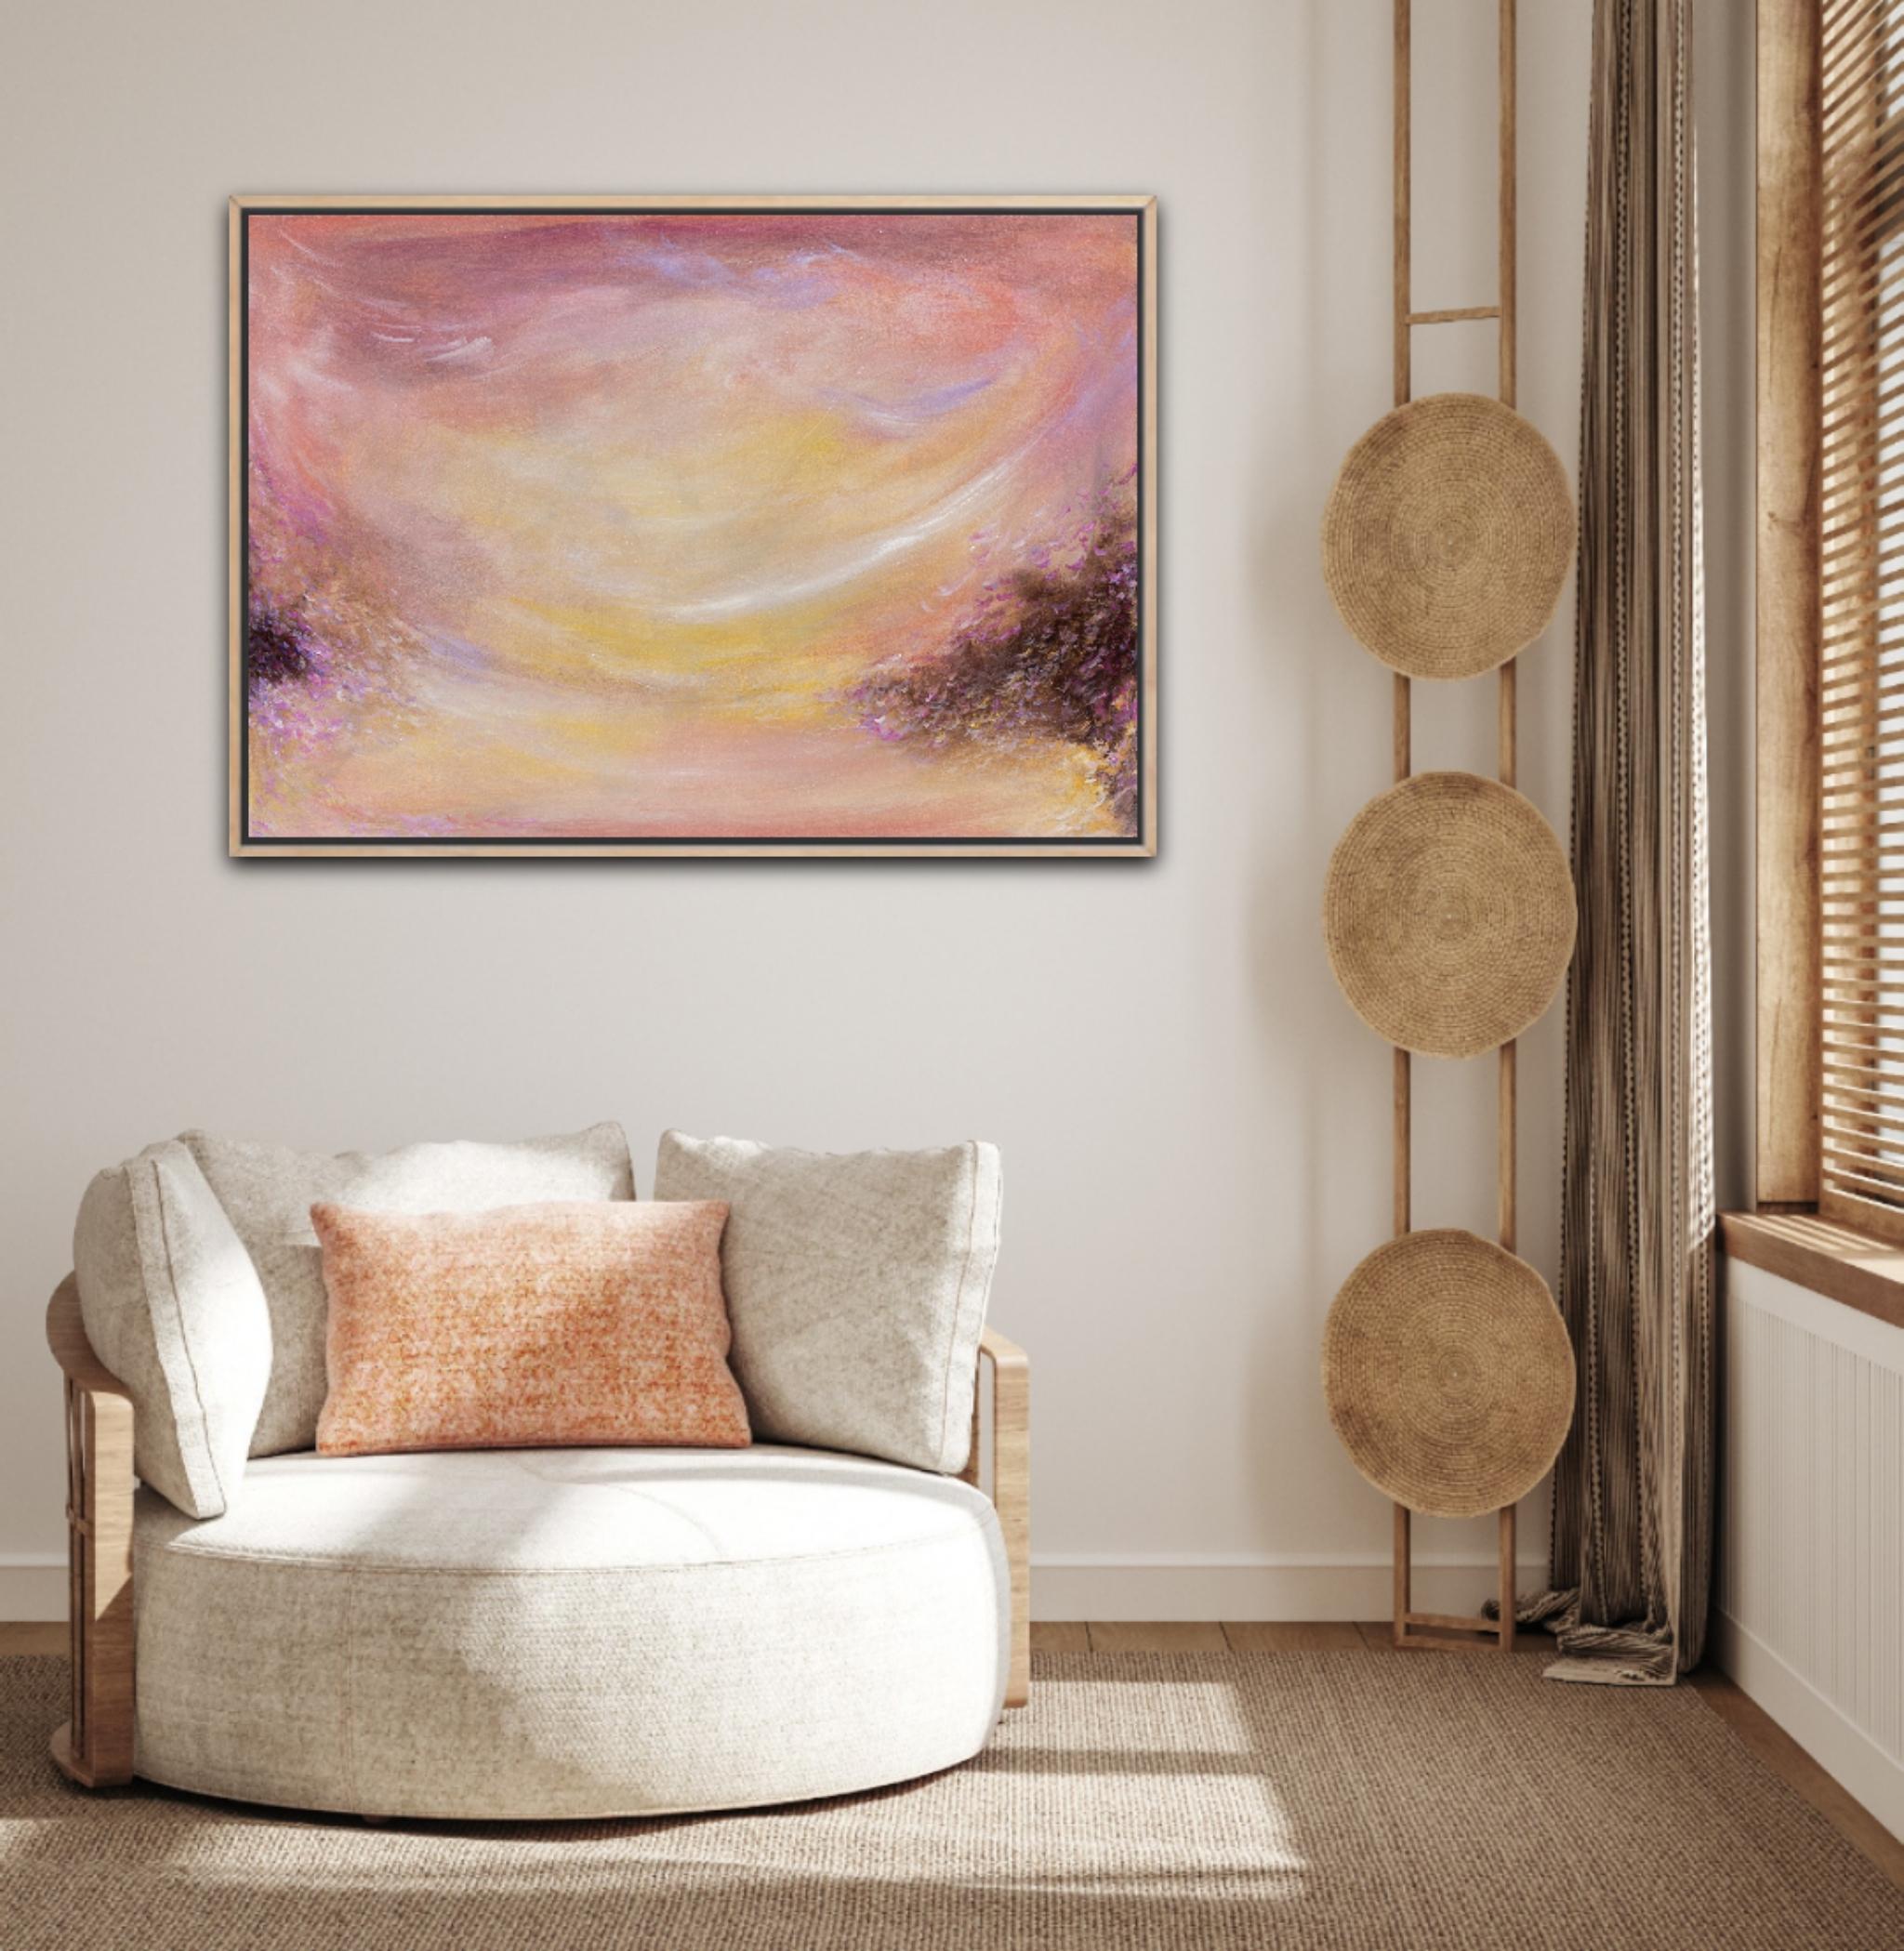 Ballad of the wind - Abstract impressionist warm sunset painting For Sale 5